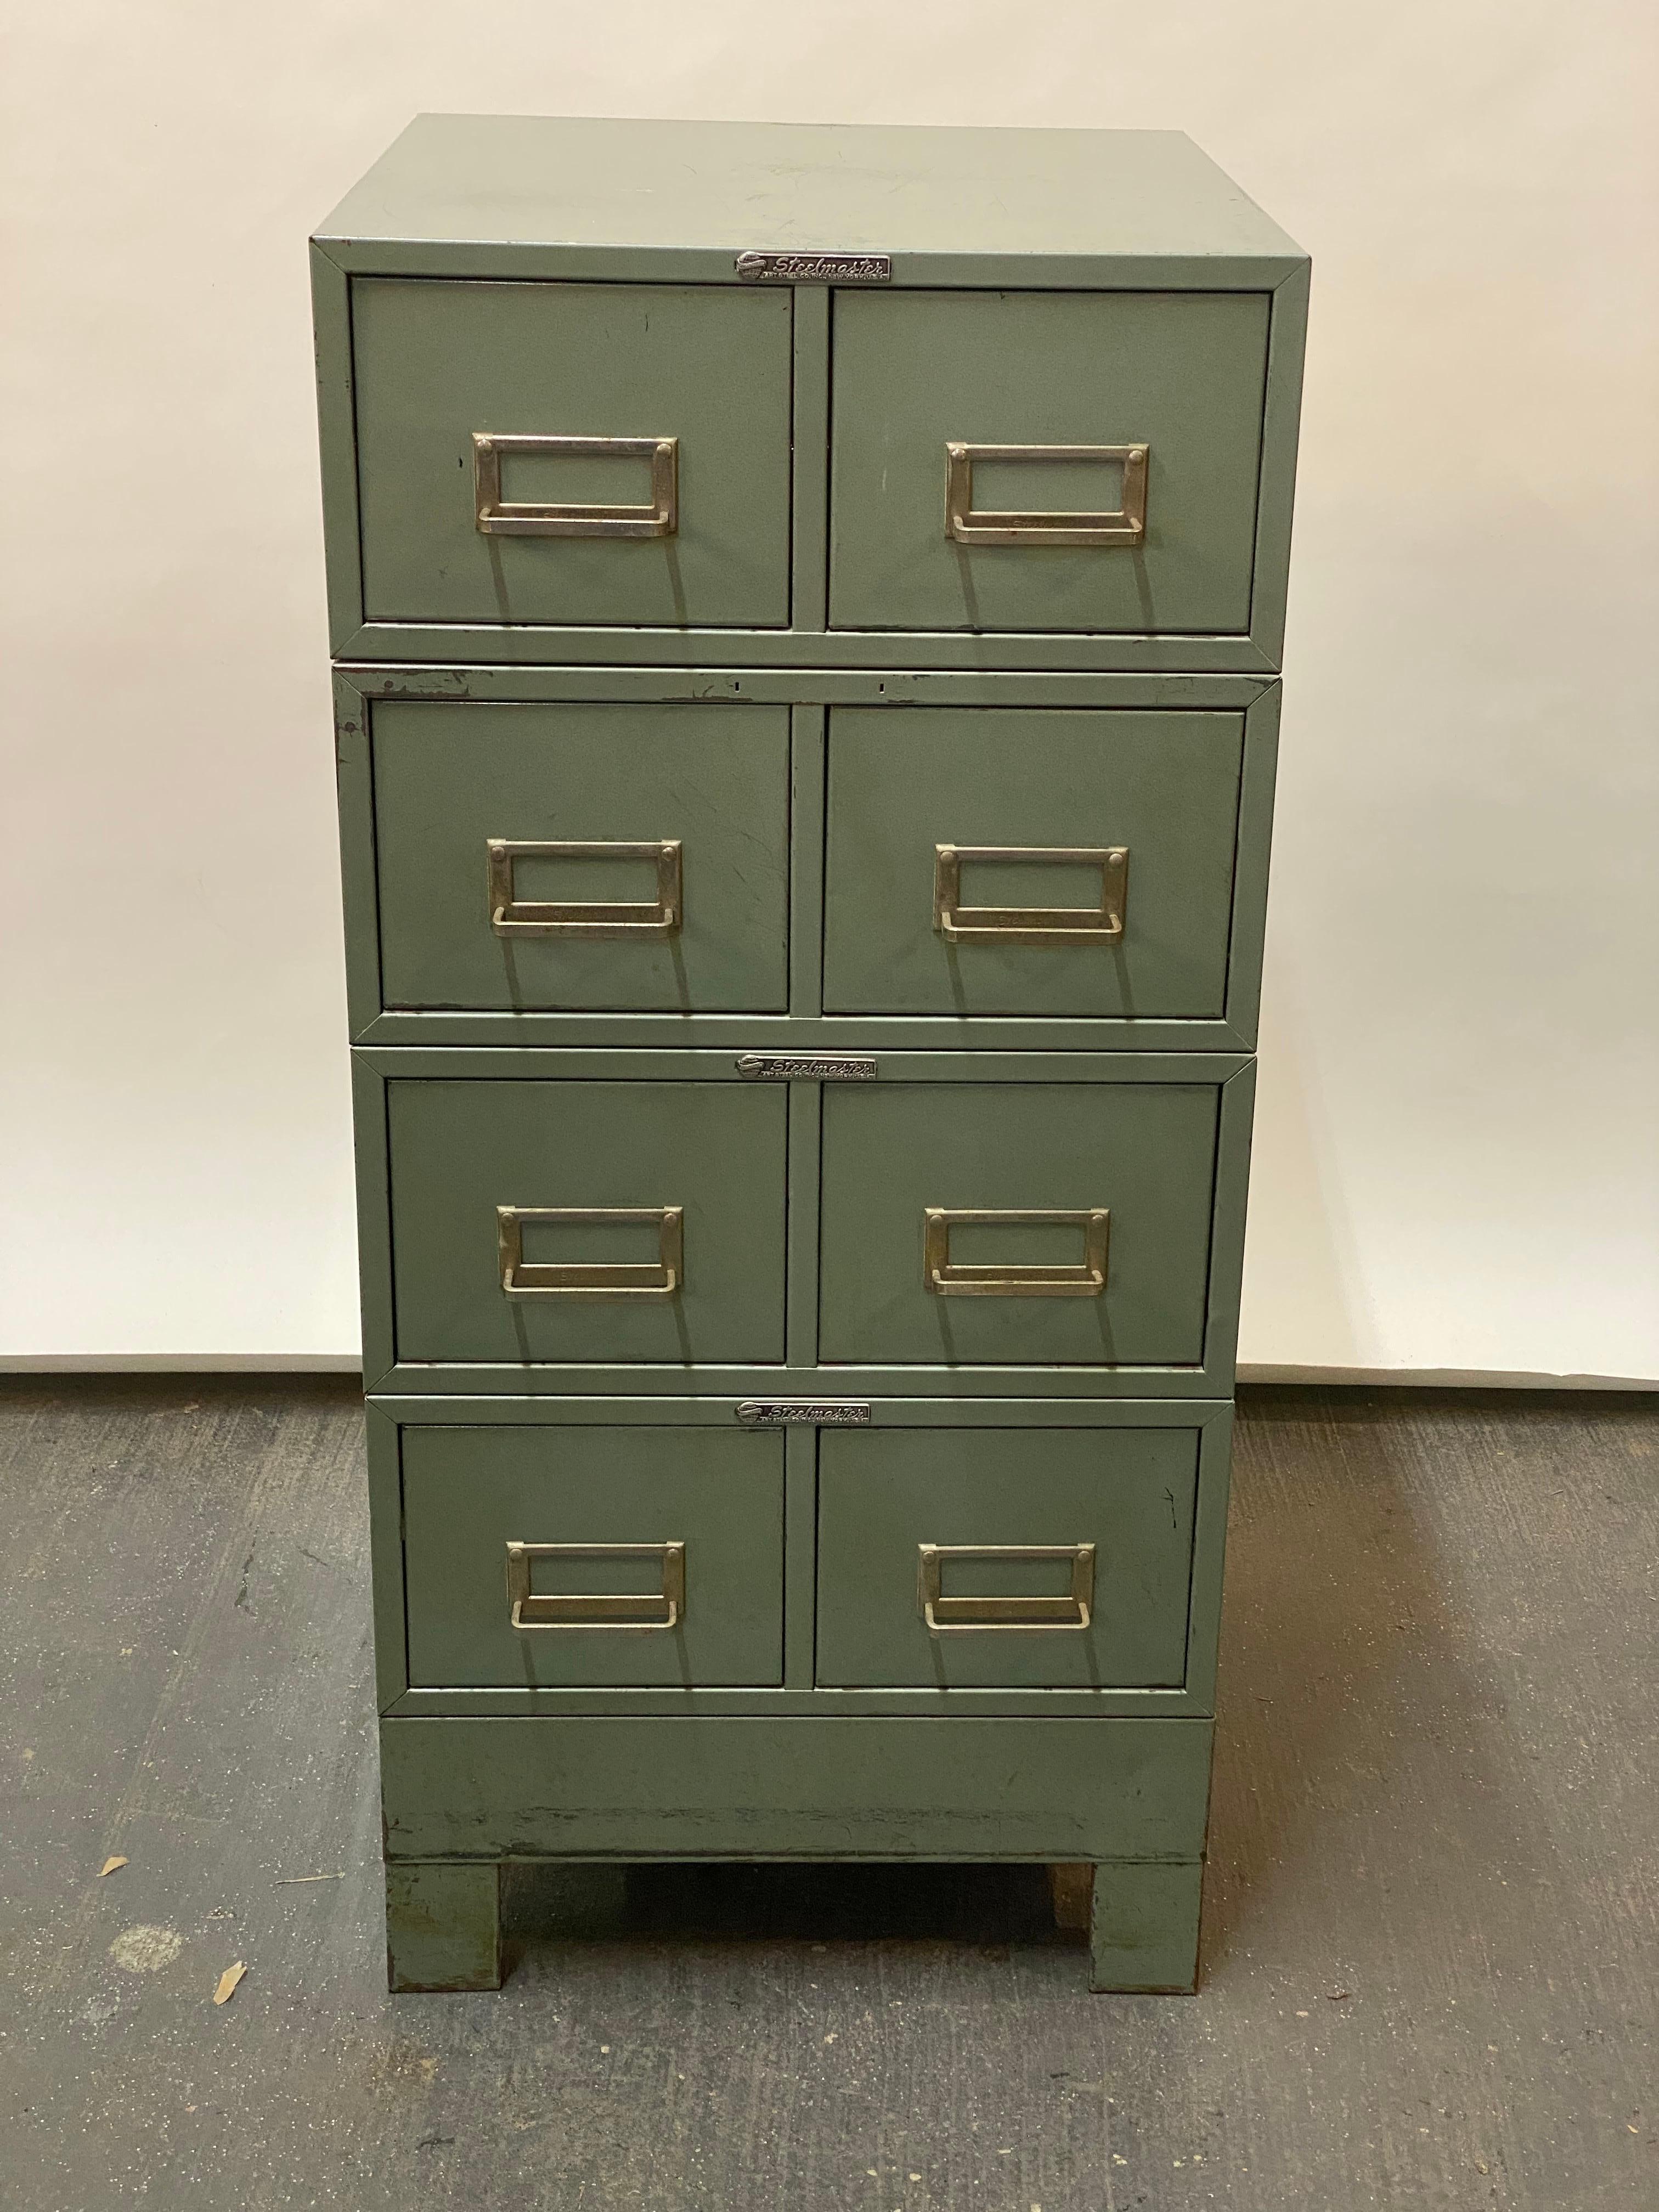 Set of four interlocking and stacking green metallic Steelmaster card file cabinets. Steelmaster, Art Steel Co., New York, USA. Each stack has two drawers. Their interiors measure approximately 6.25